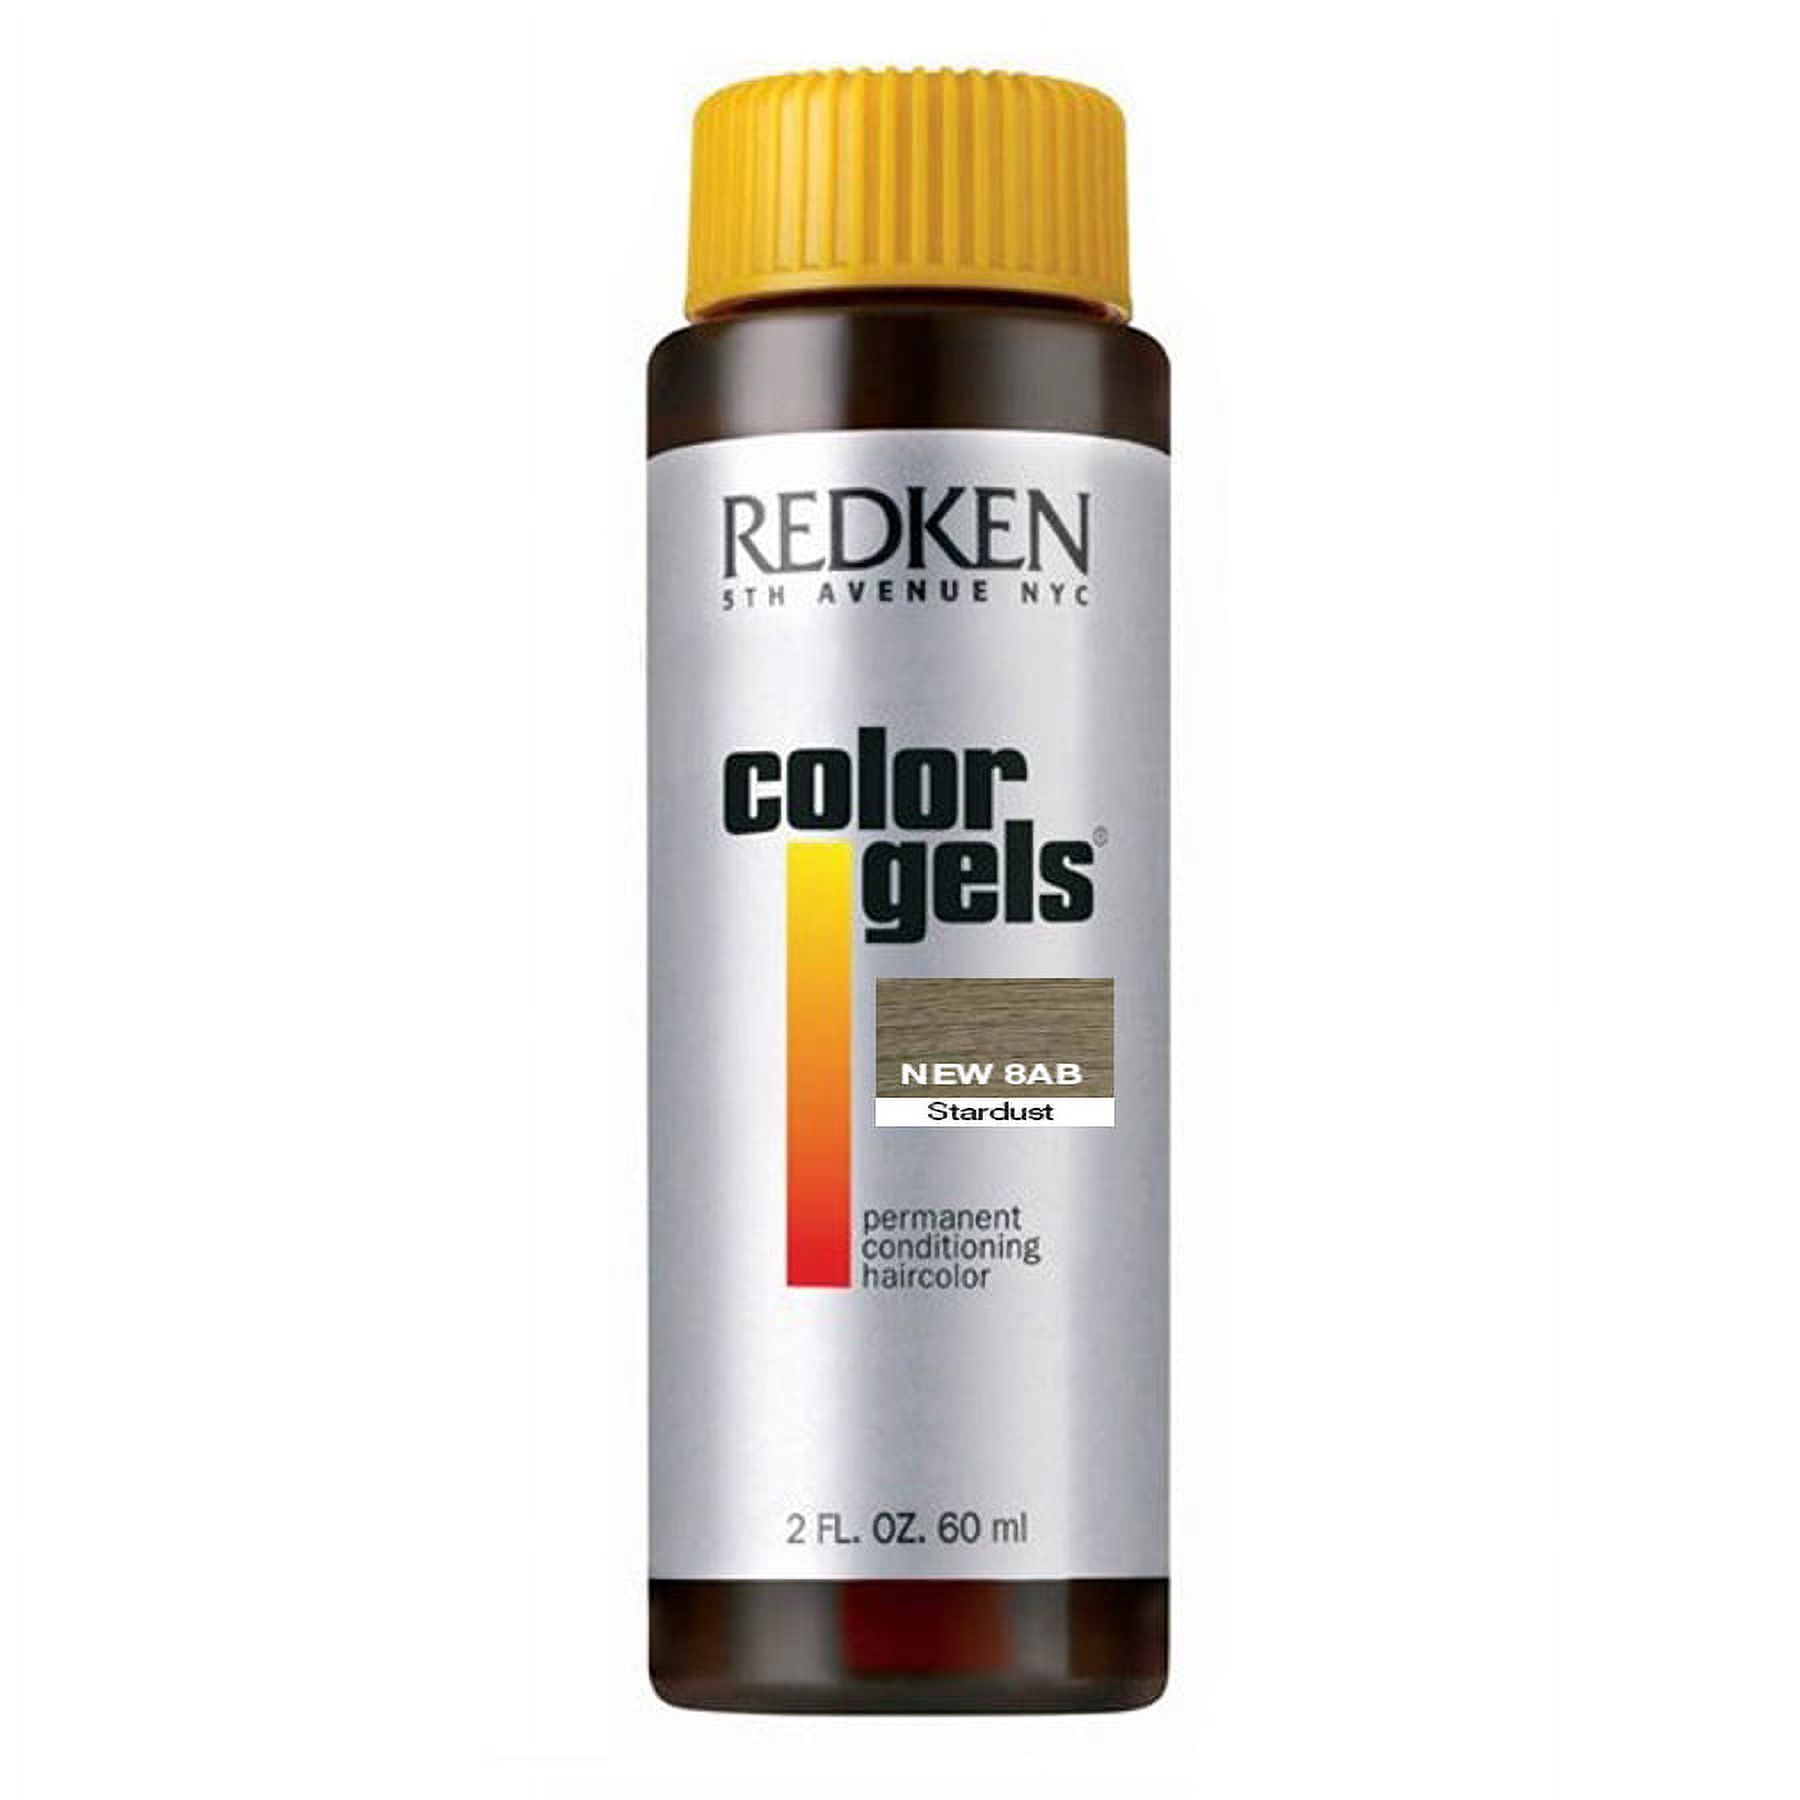 Redken Color Gels Permanent Conditioning Haircolor - Color : 8AB-Stardust - image 1 of 2